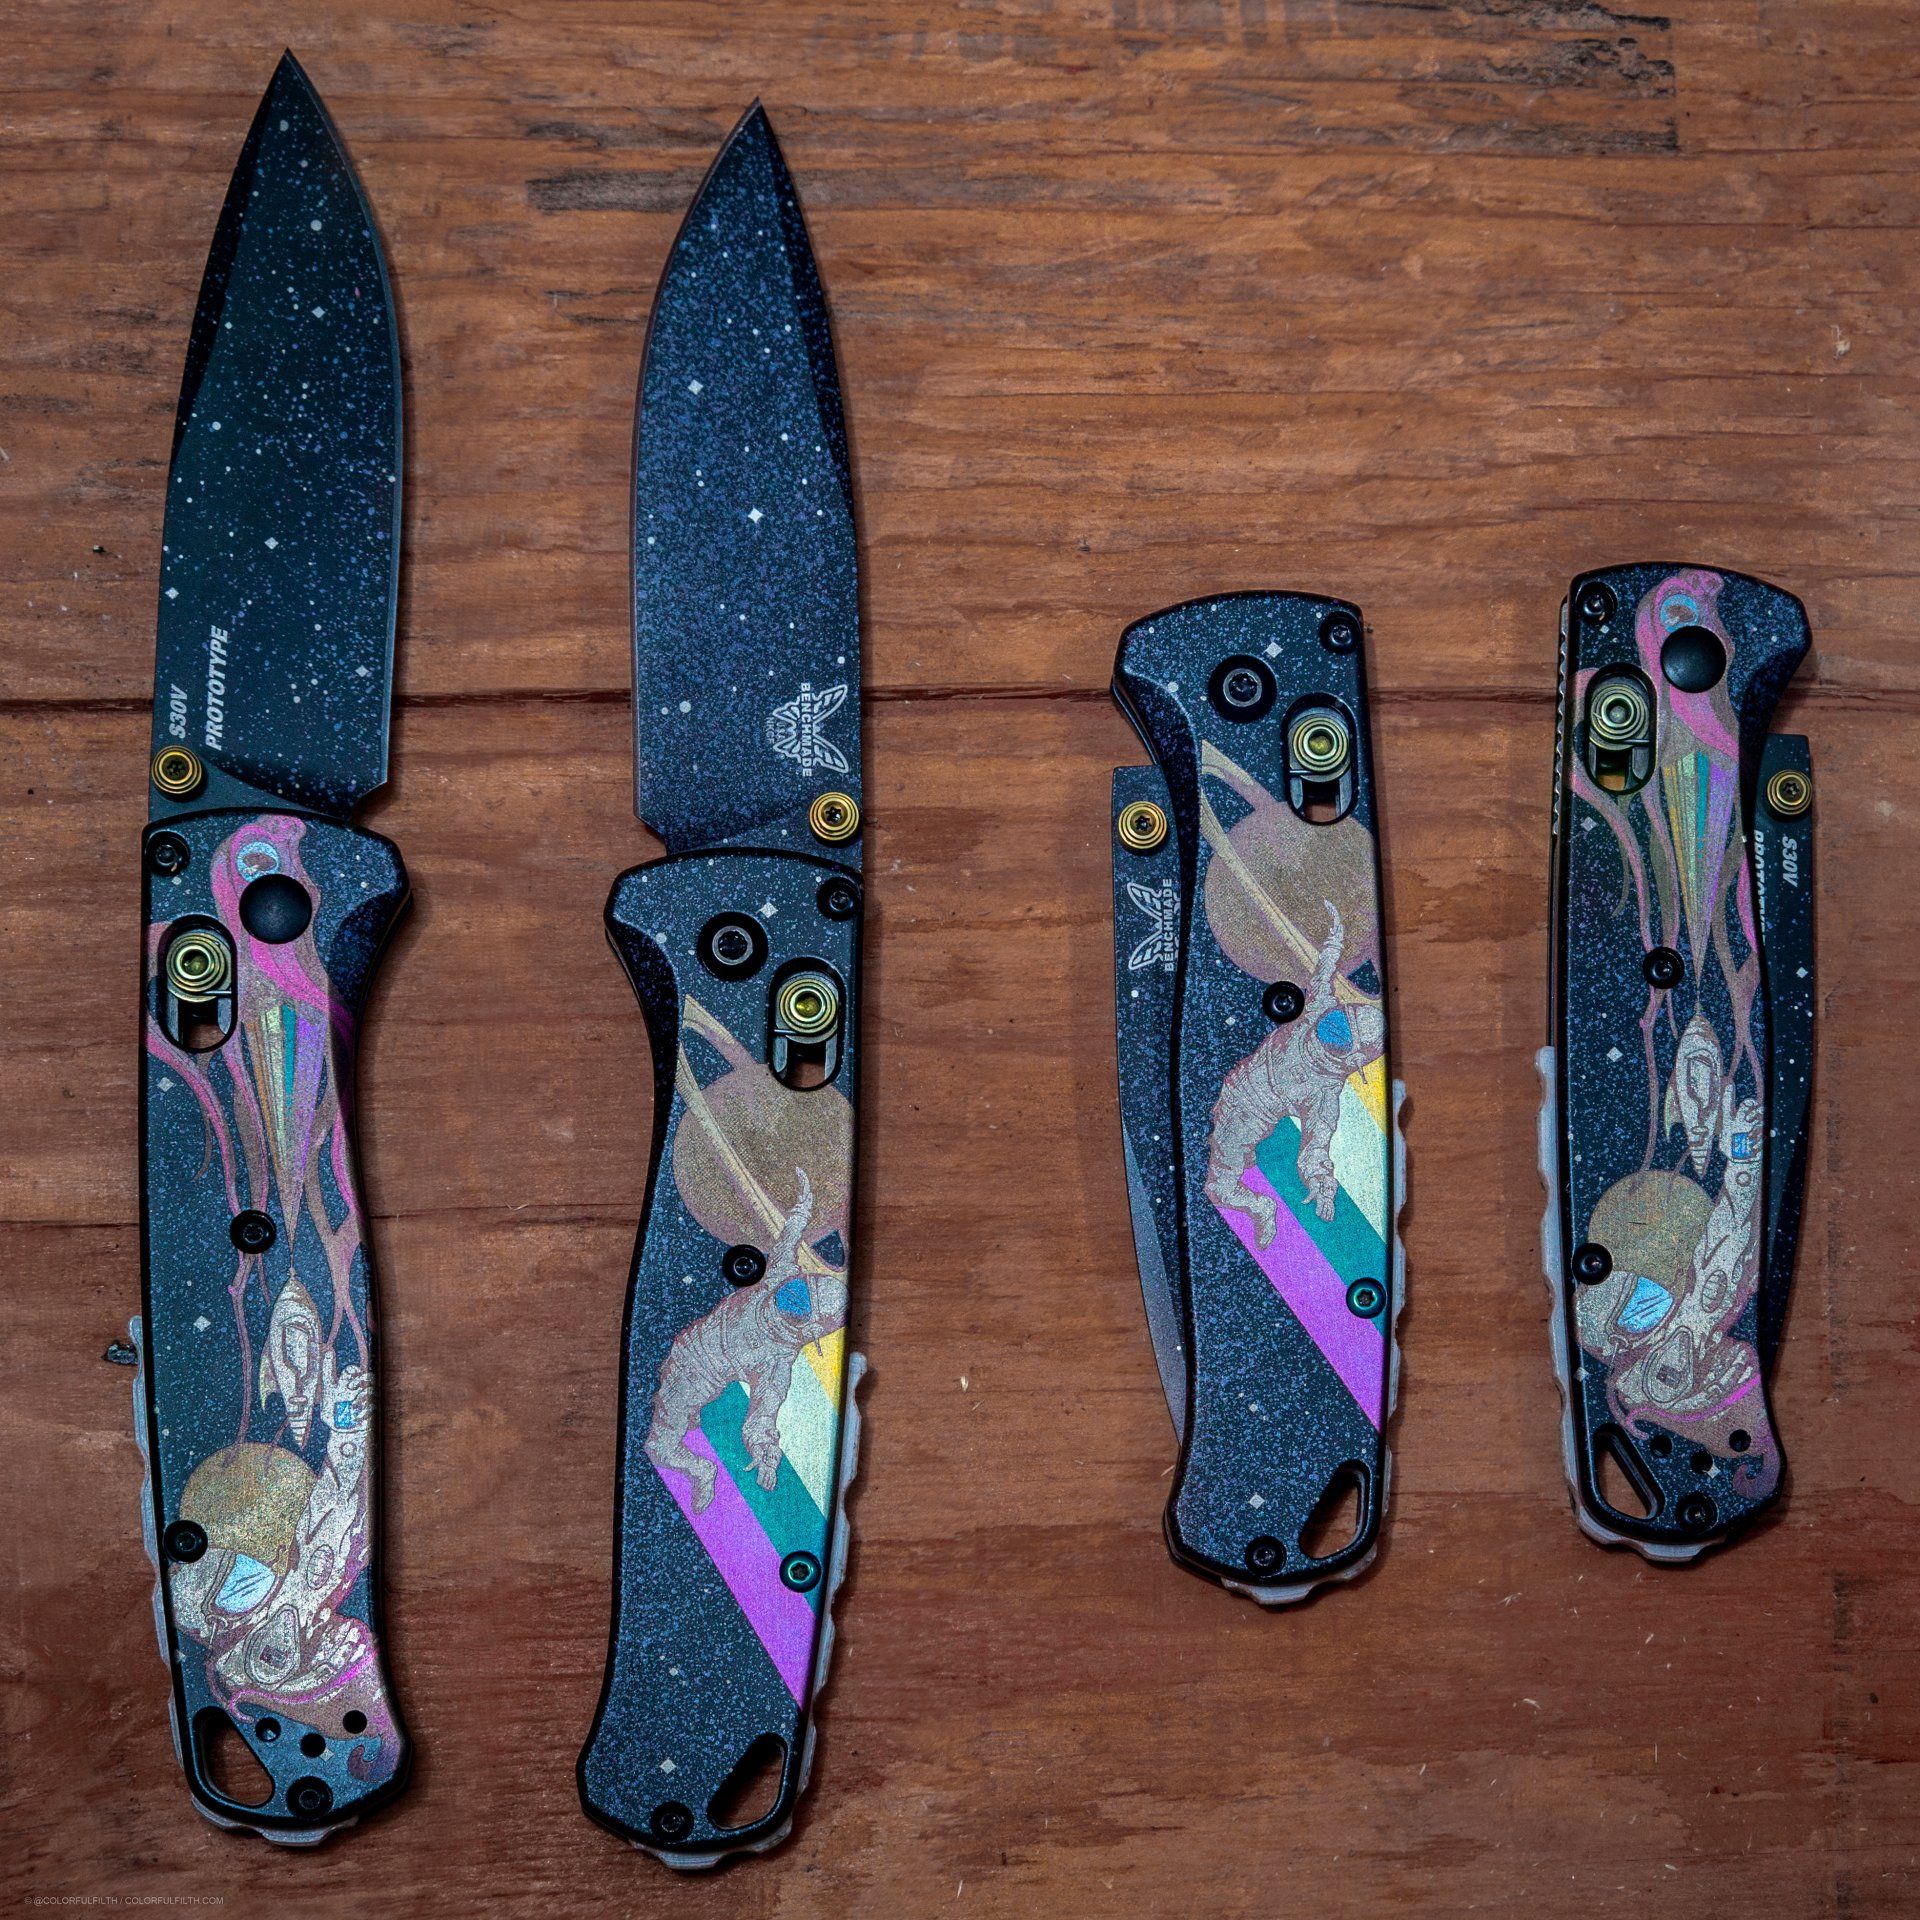 Open and closed composite image of the Northern Knives x Colorful Filth Benchmade Bugout